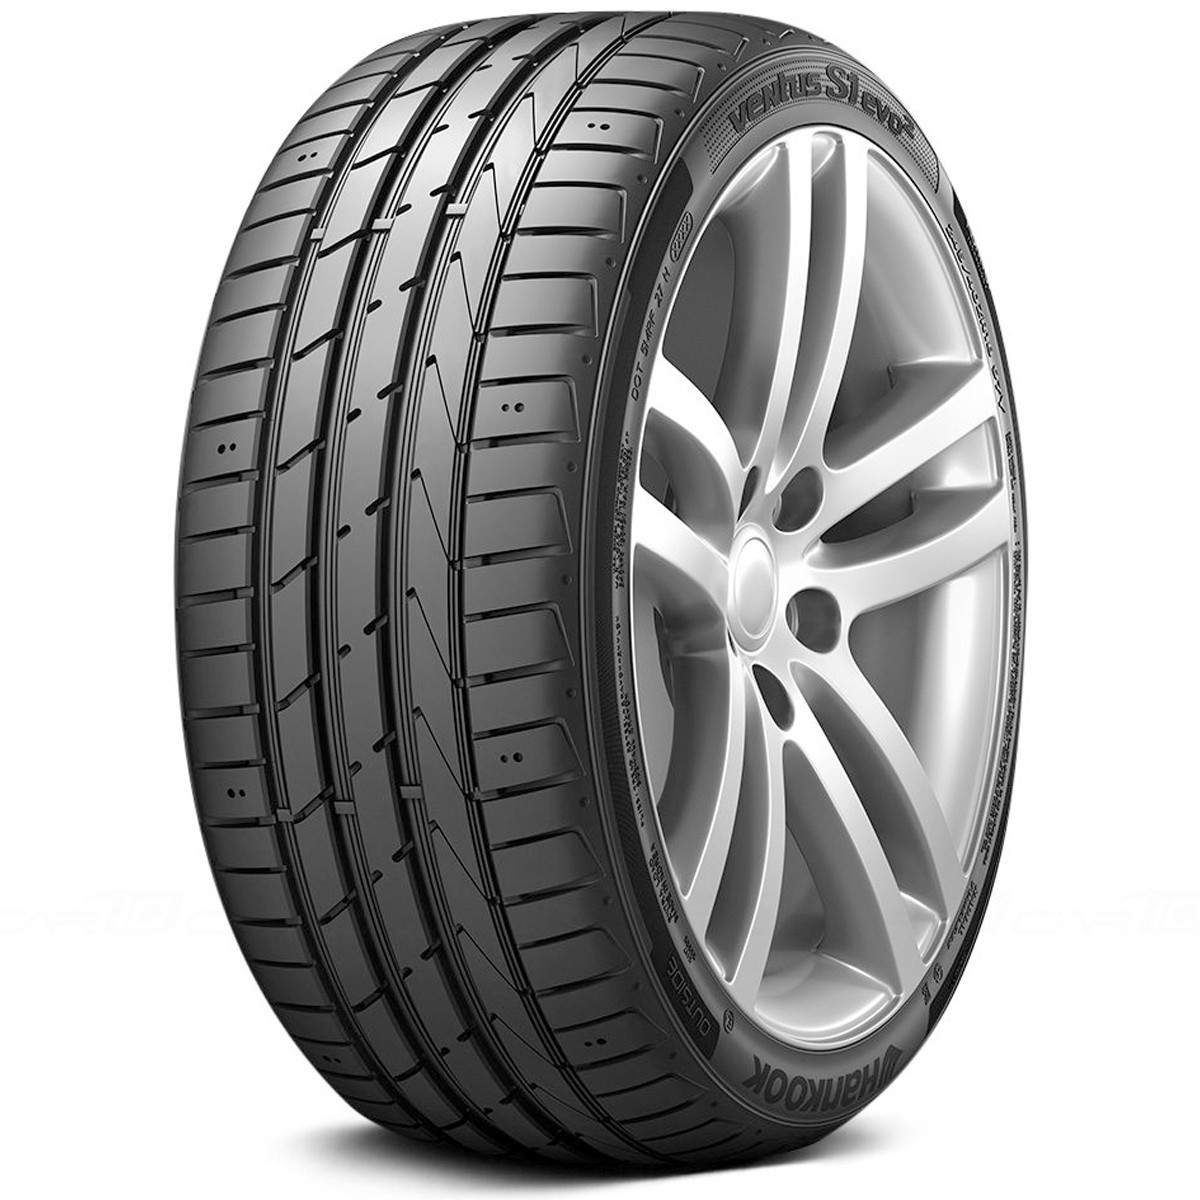 Drink water Laws and regulations Slippery Hankook Ventus S1 evo2 - Tire Reviews and Tests